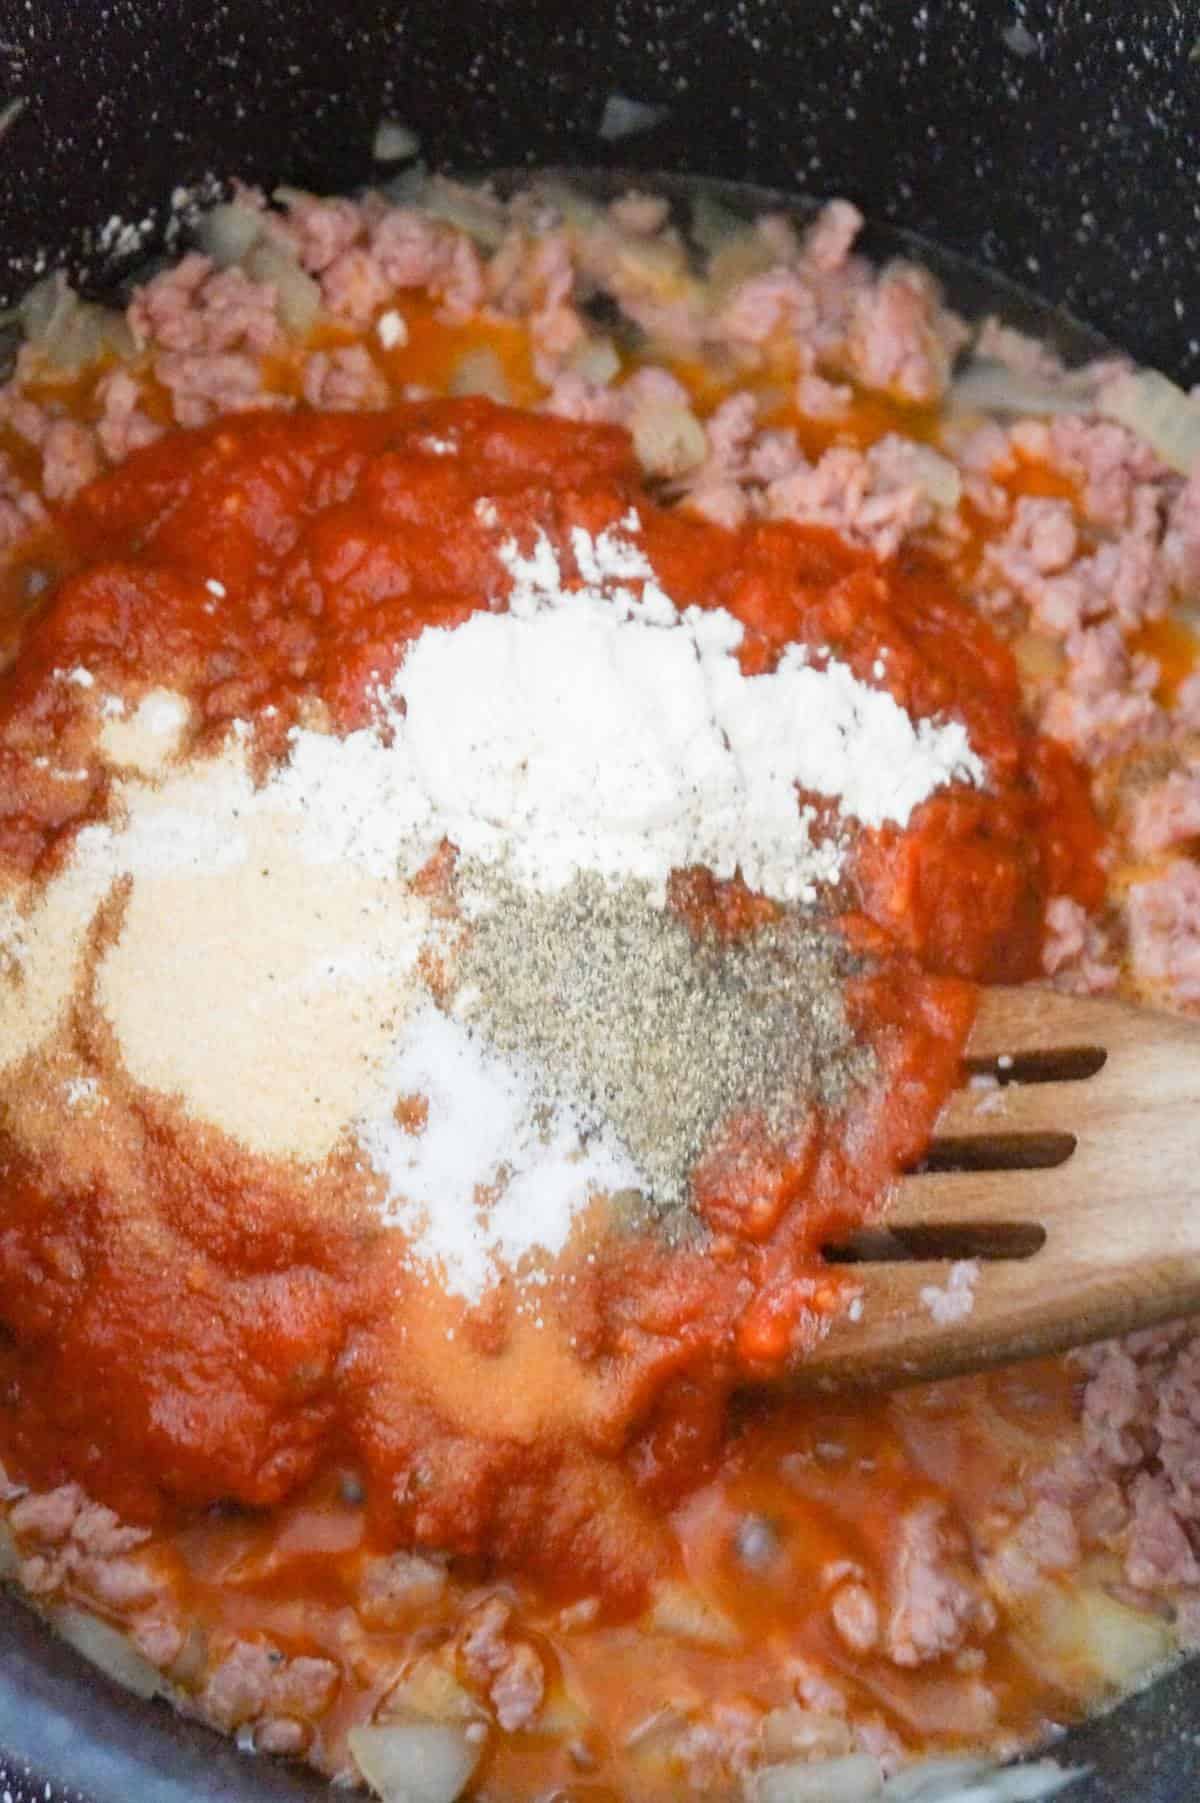 spices and marinara sauce on top of Italian sausage meat in a large pot